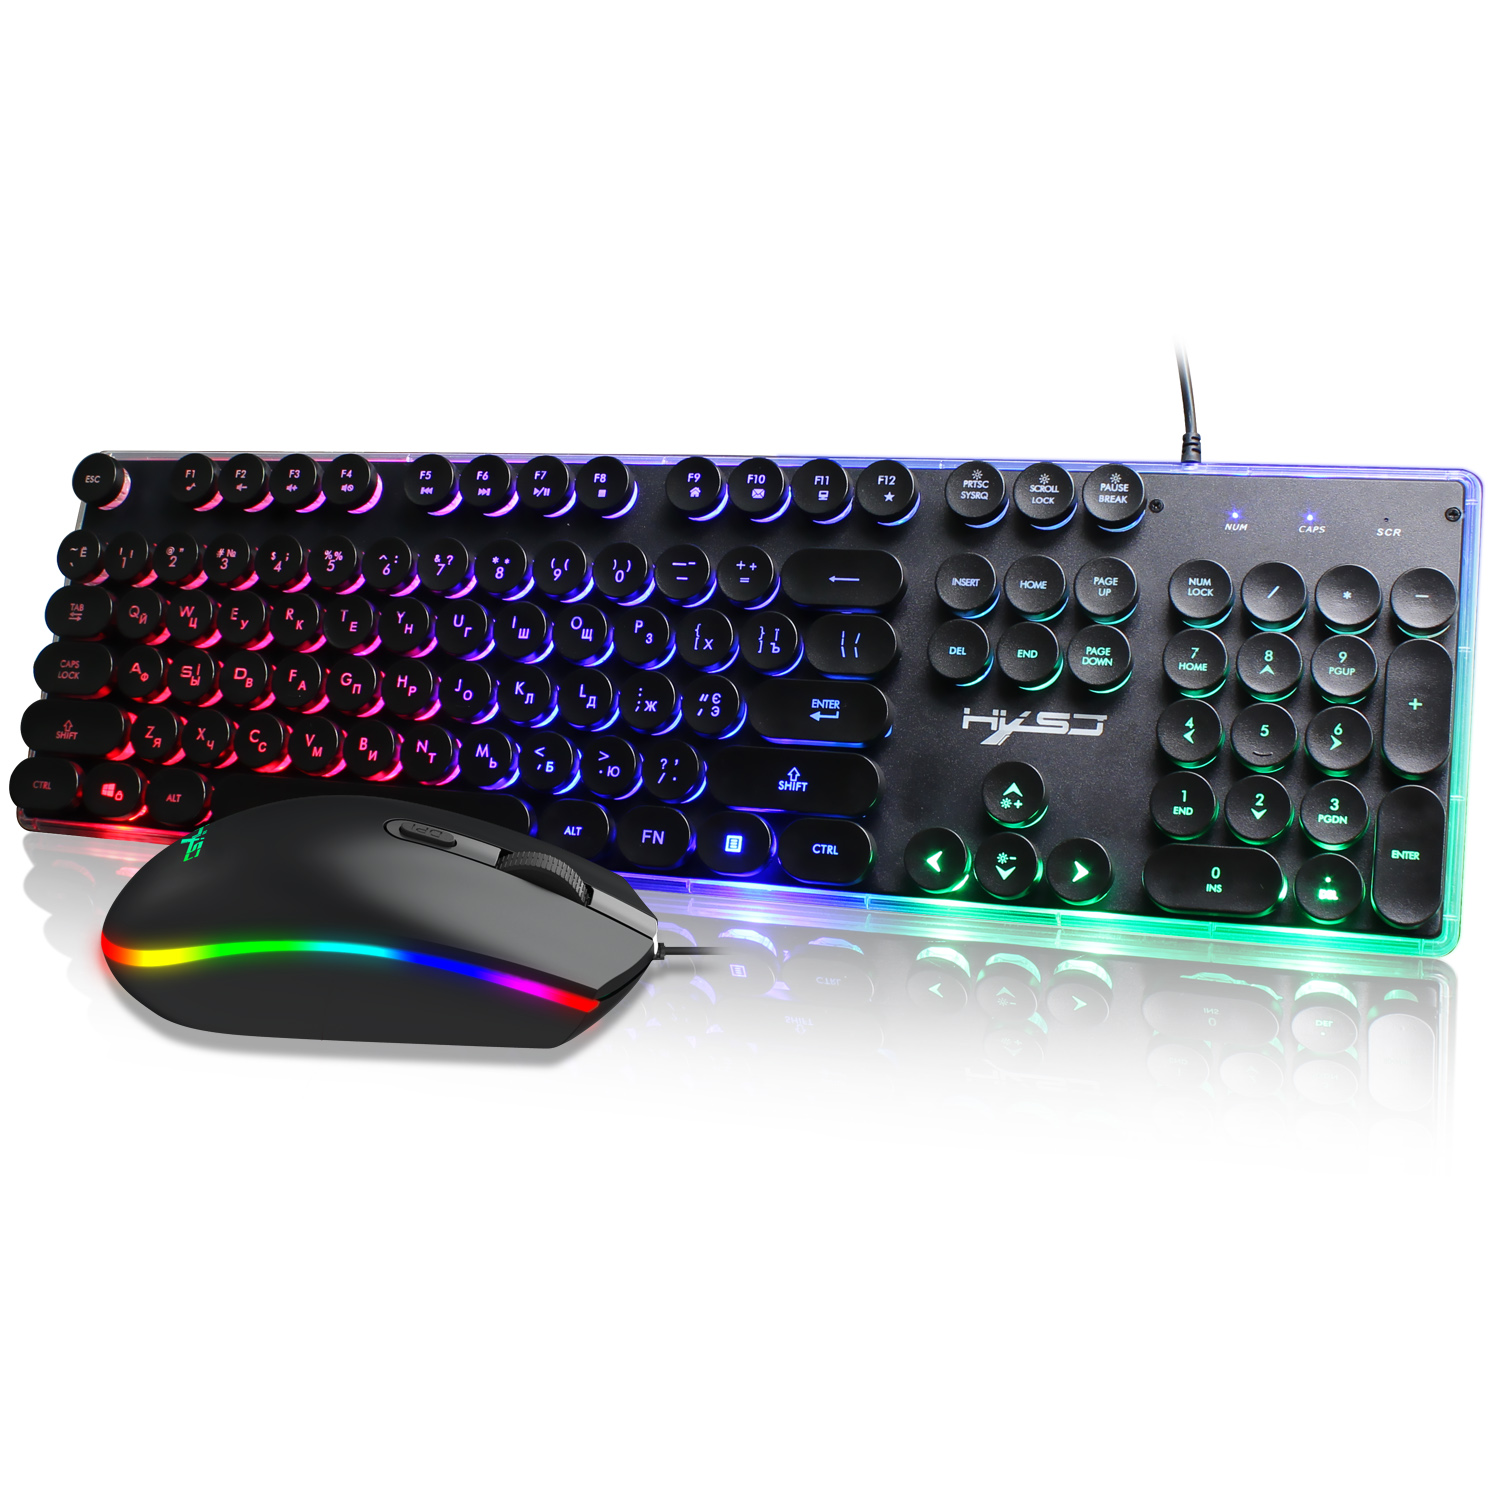 

V300 104 key Backlit Wired Russian Gaming Keyboard and 1600DPI Gaming Mouse Combo for PC Laptop